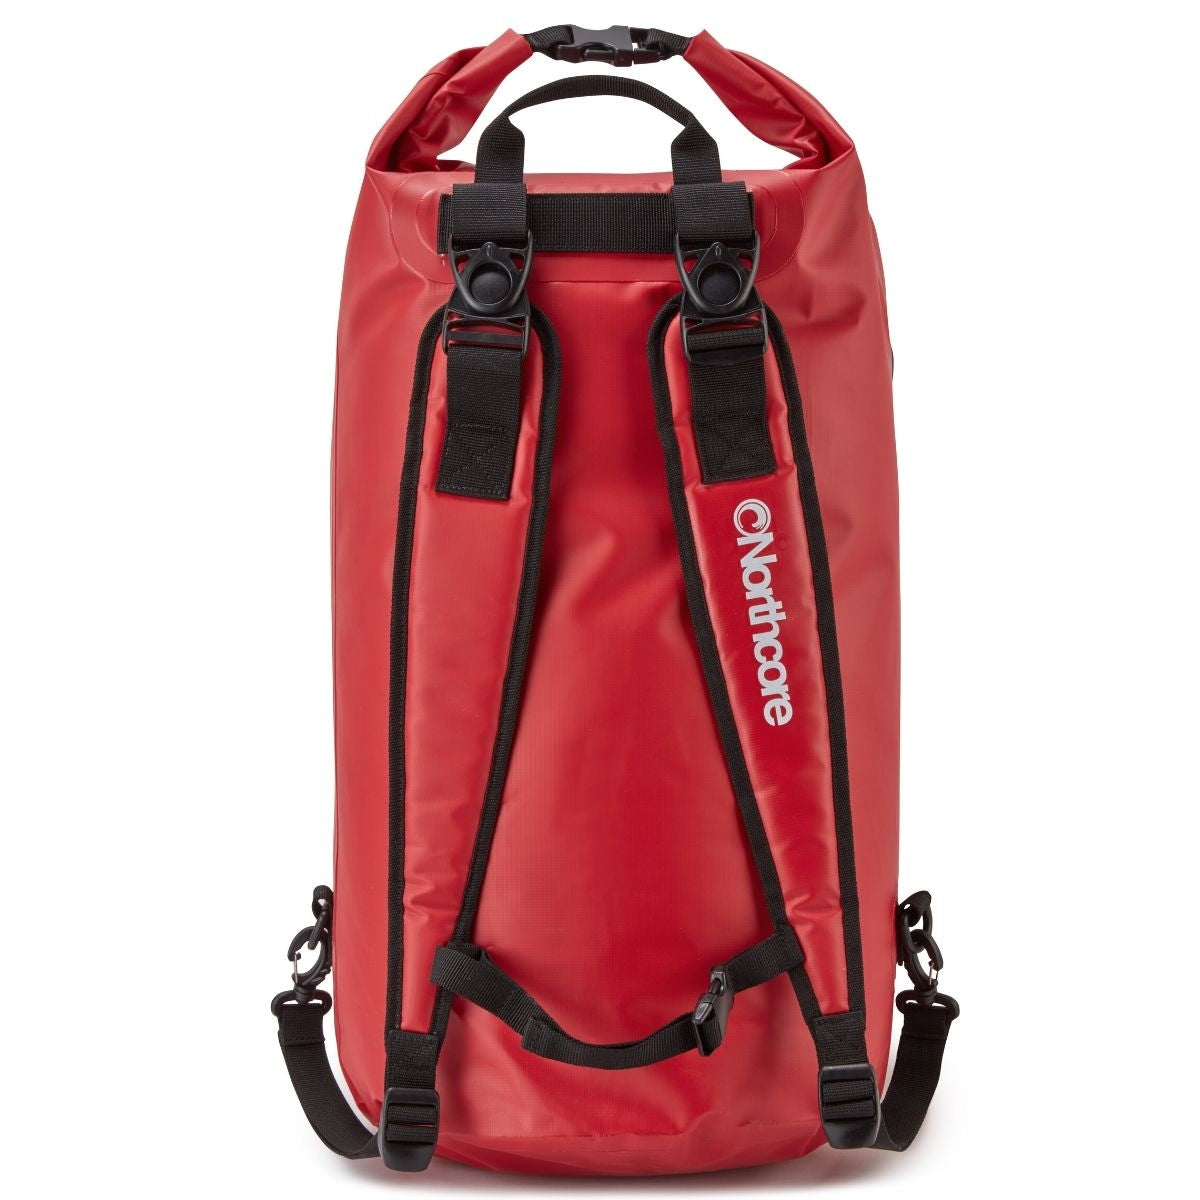 Northcore Heavy Duty Waterproof Dry Bag Backpack 40L Red